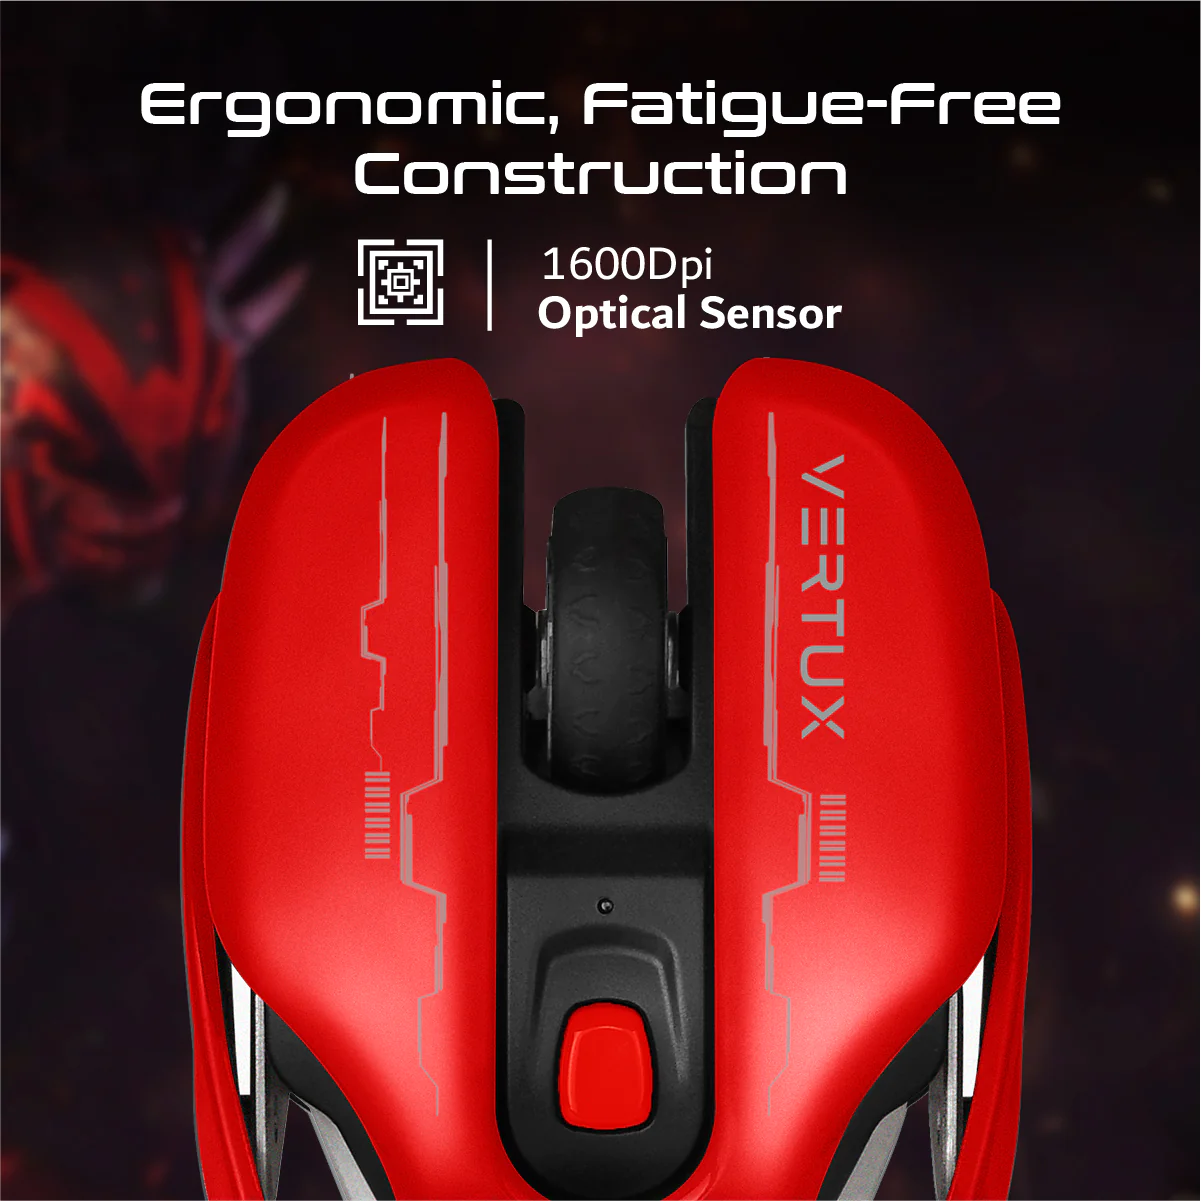 Vertux Glider Wireless Gaming Mouse - Red